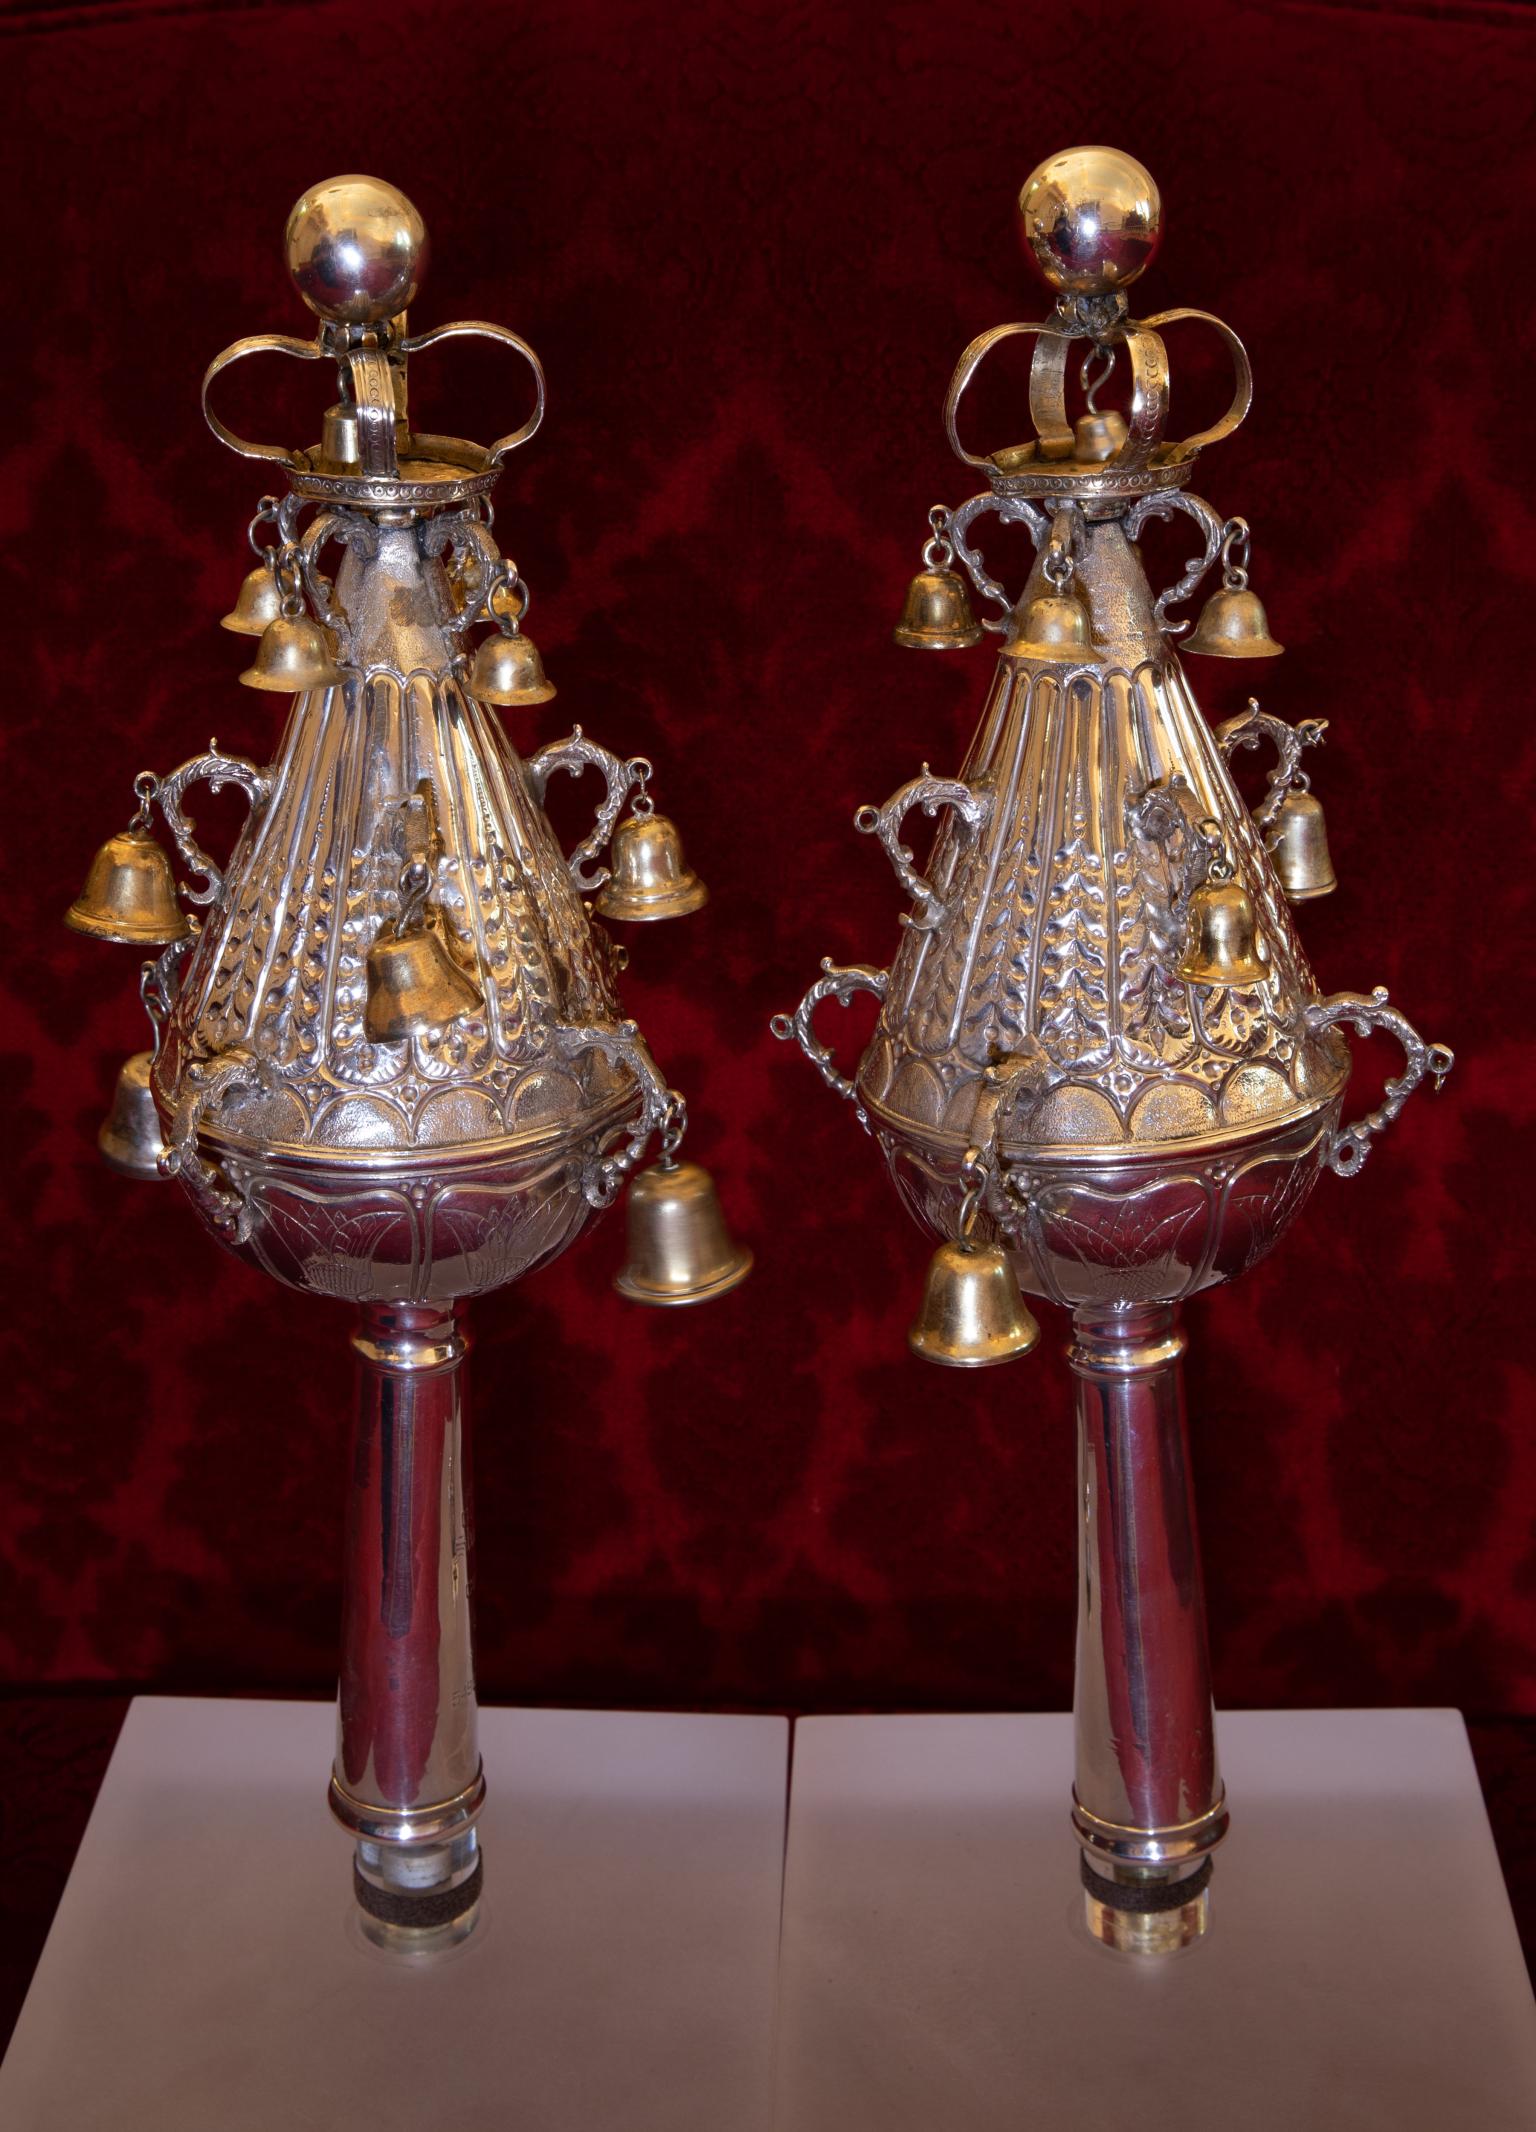 Two silver finials with bells. 